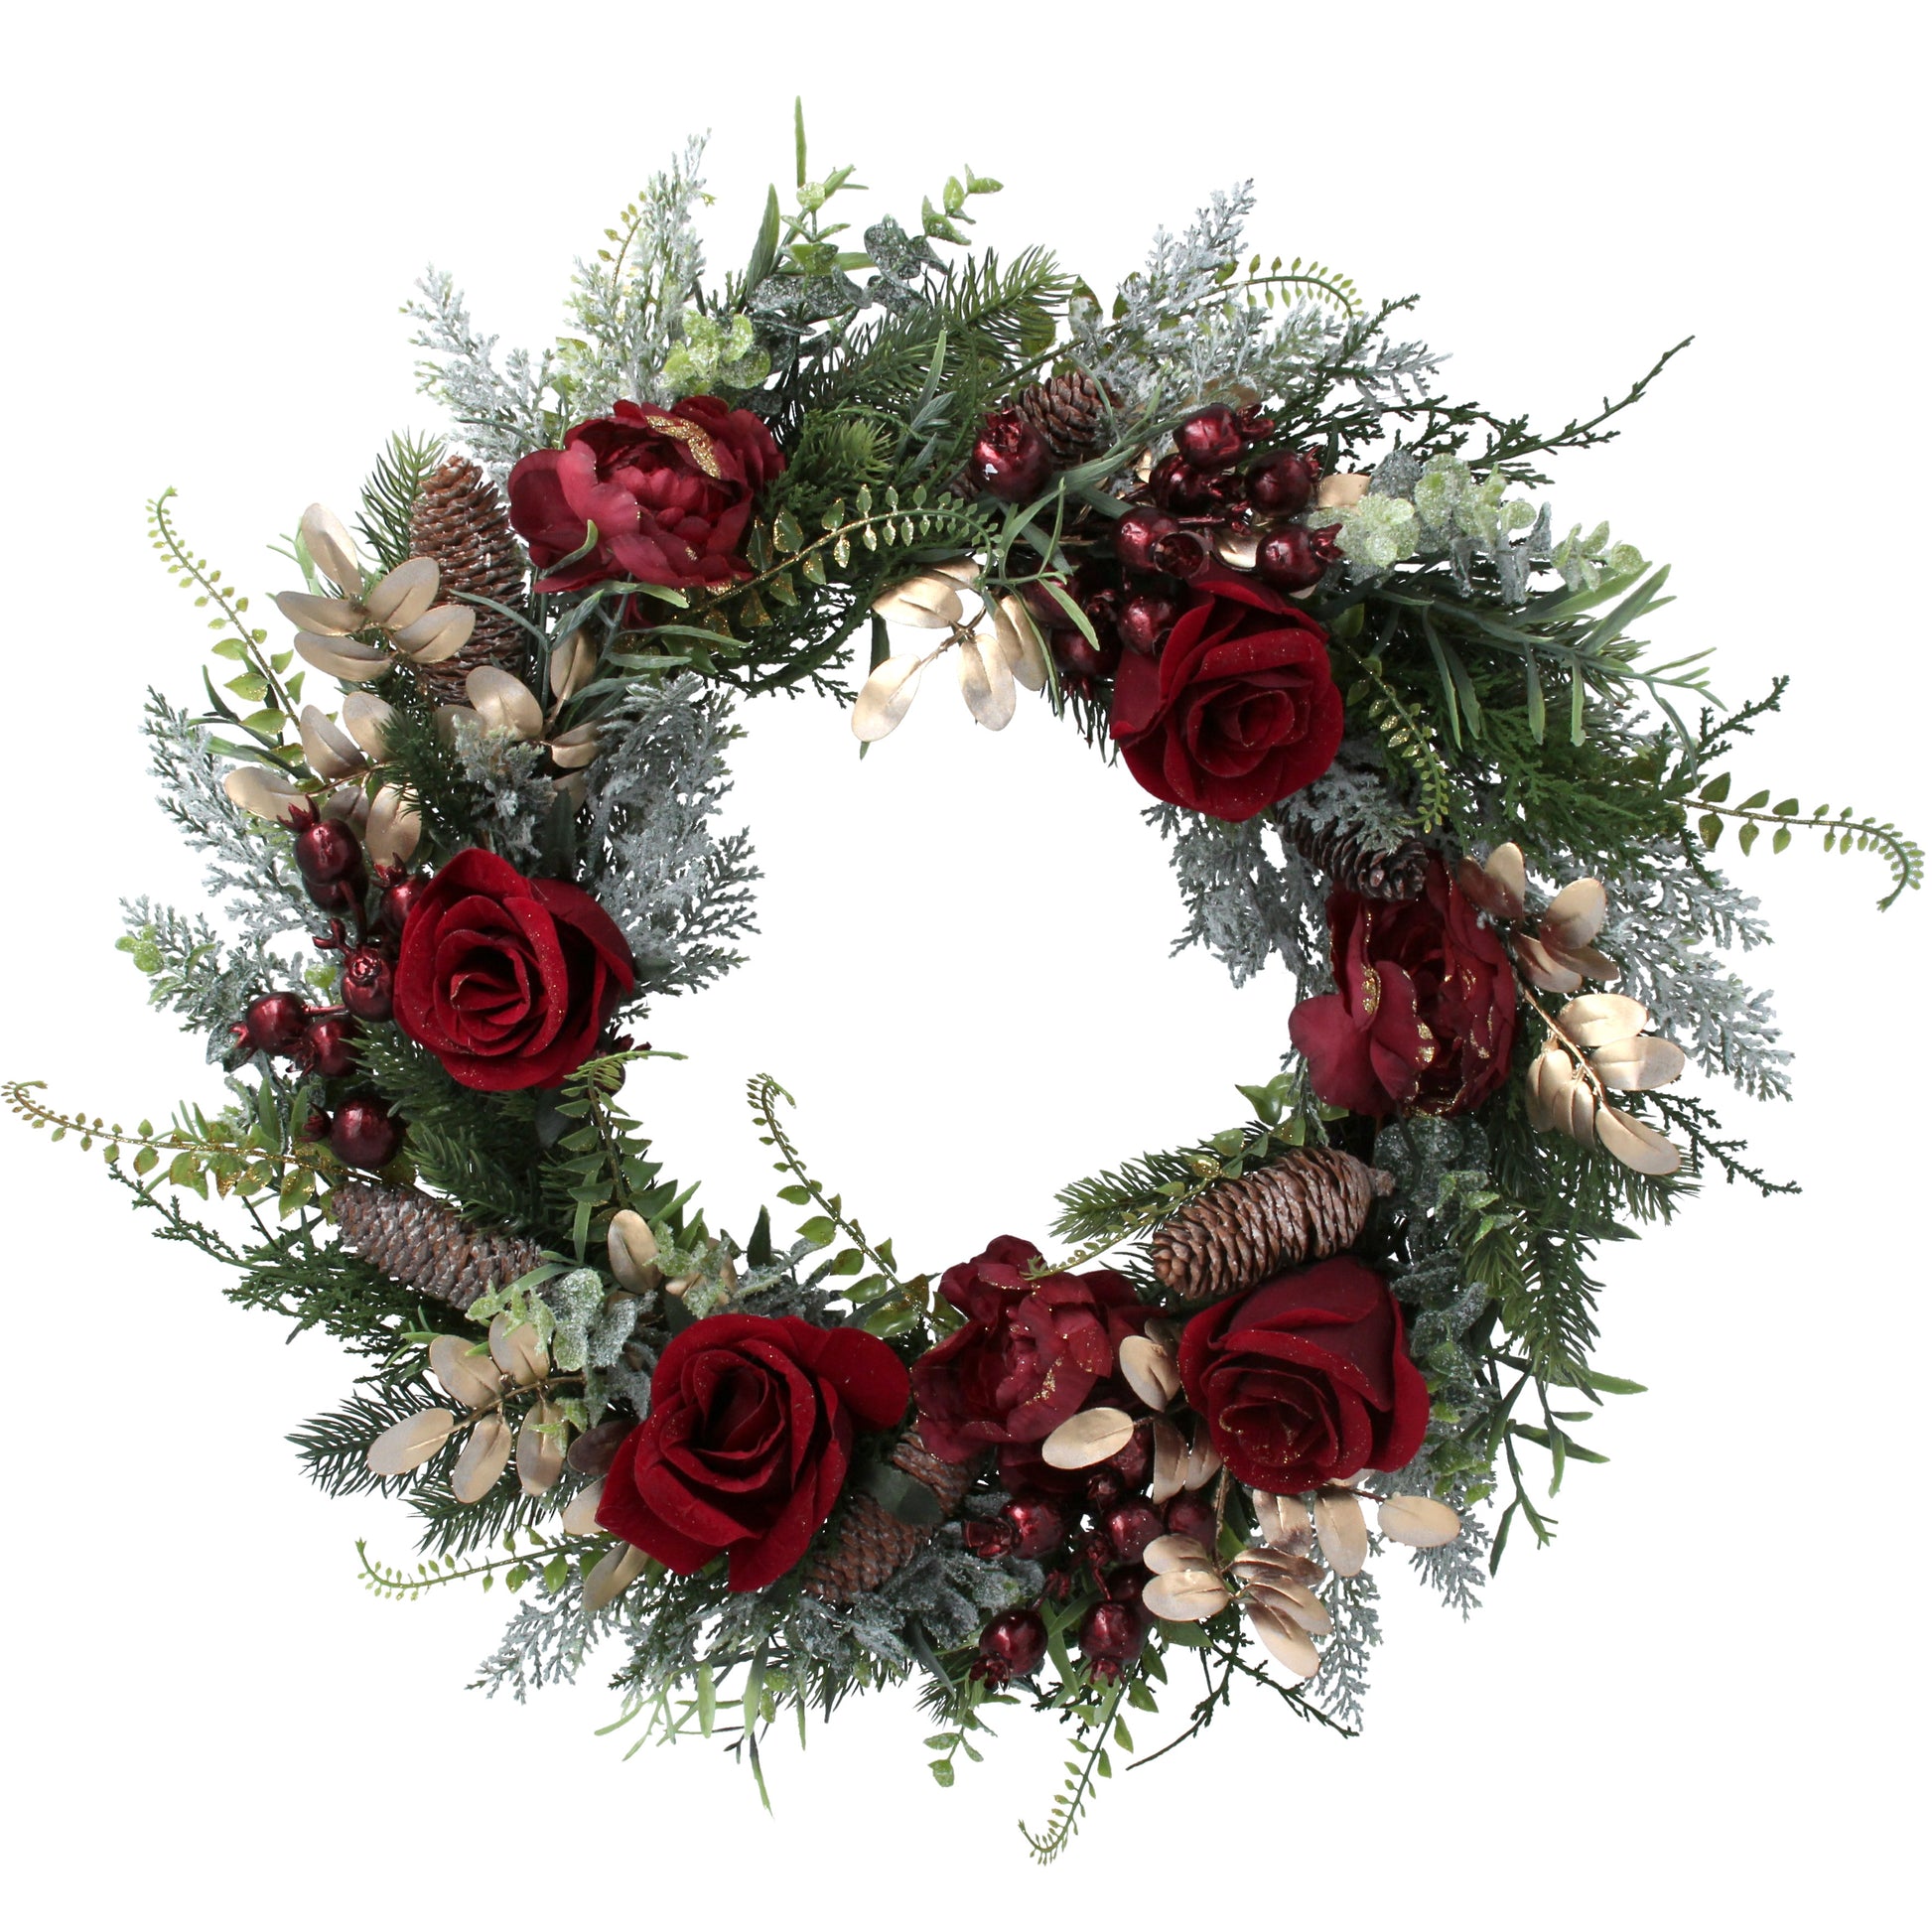 Green Wreath with Red Roses Not specified